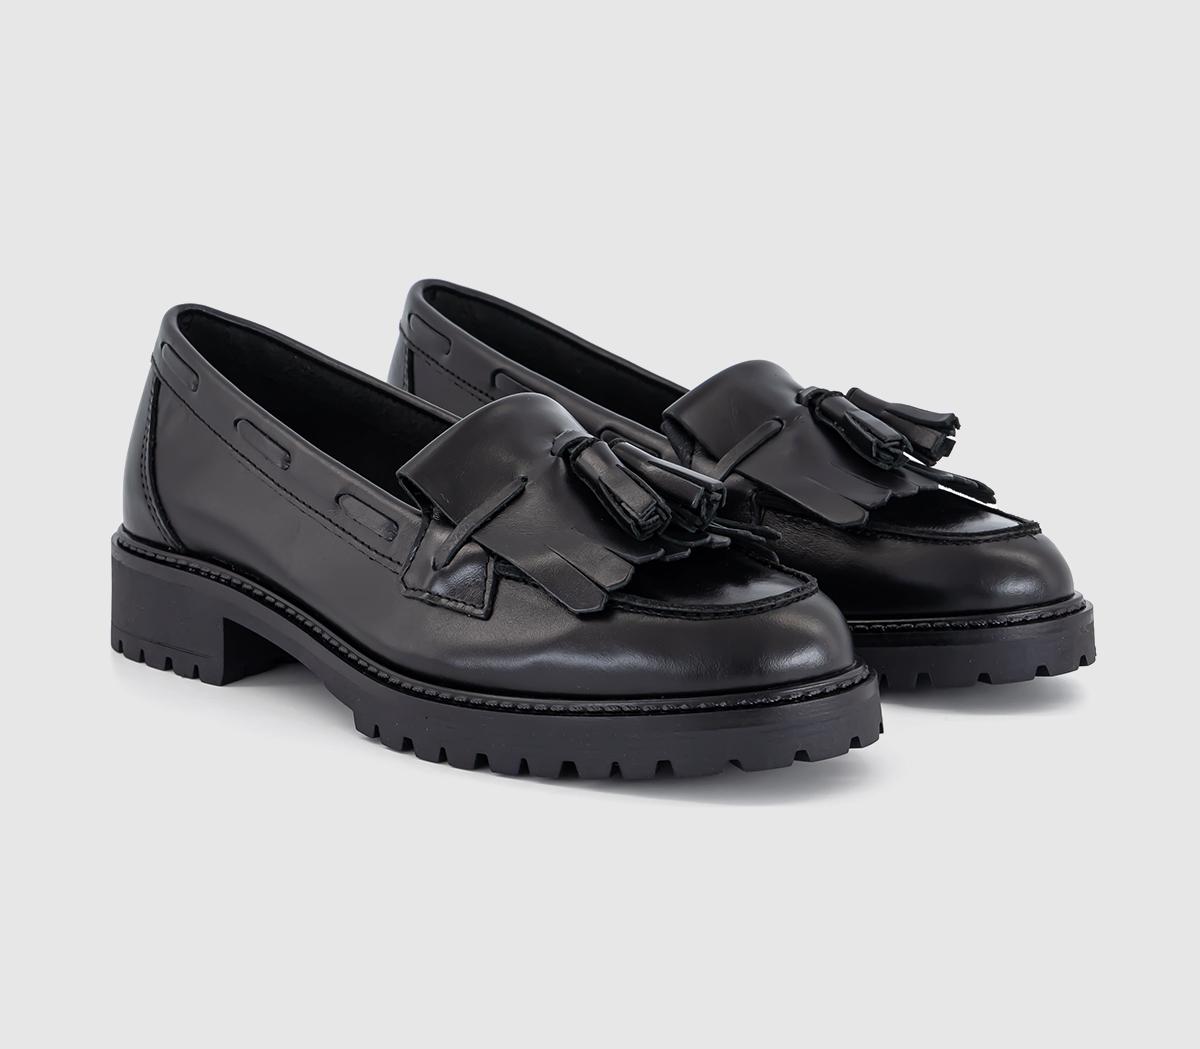 OFFICE Womens Frey Fringe Tassel Cleated Loafers Black Leather, 5